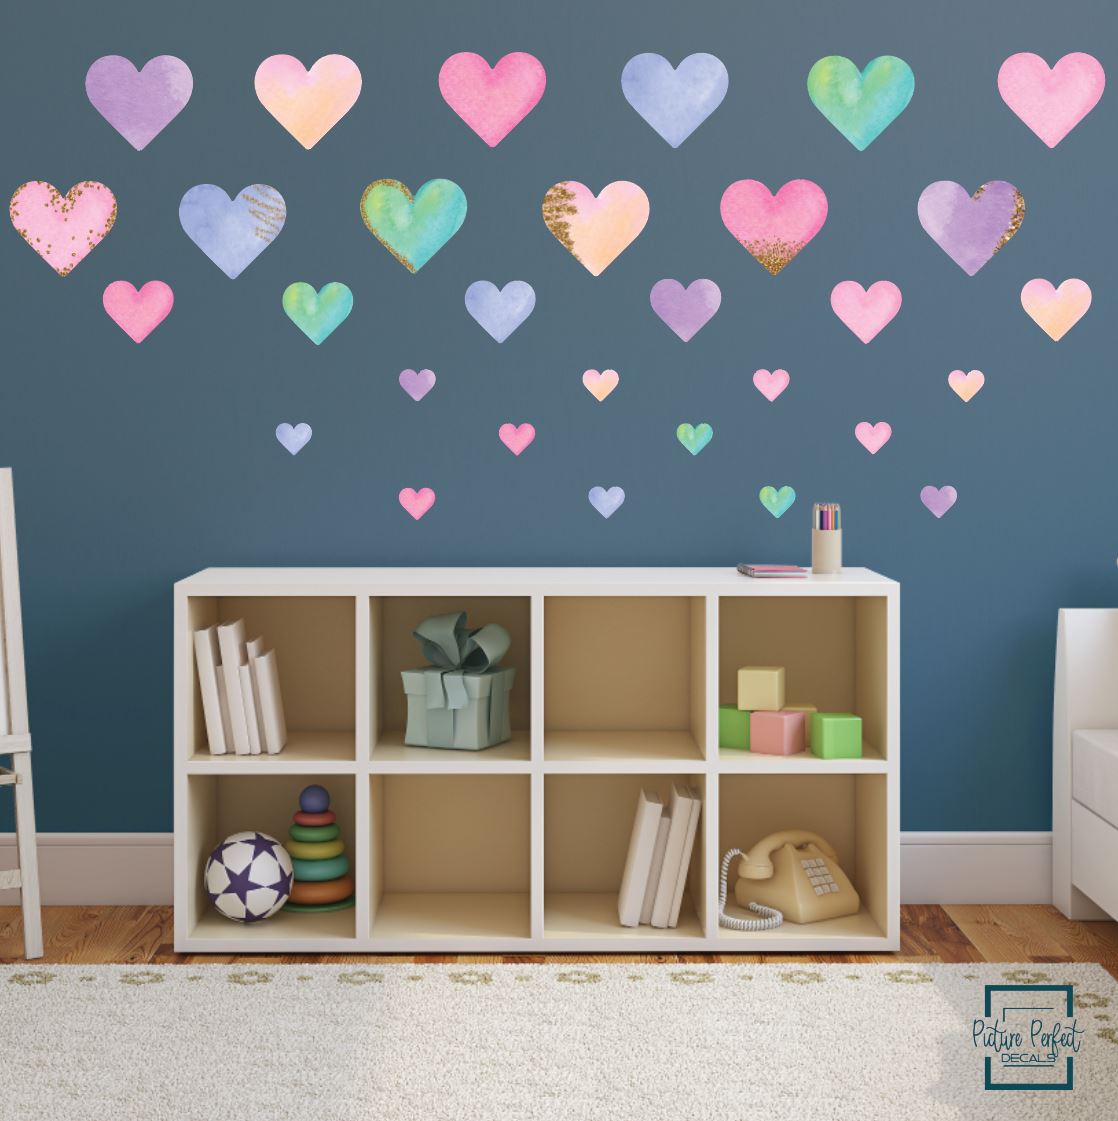 Watercolor Hearts Wall Decals | Rainbow - Picture Perfect Decals